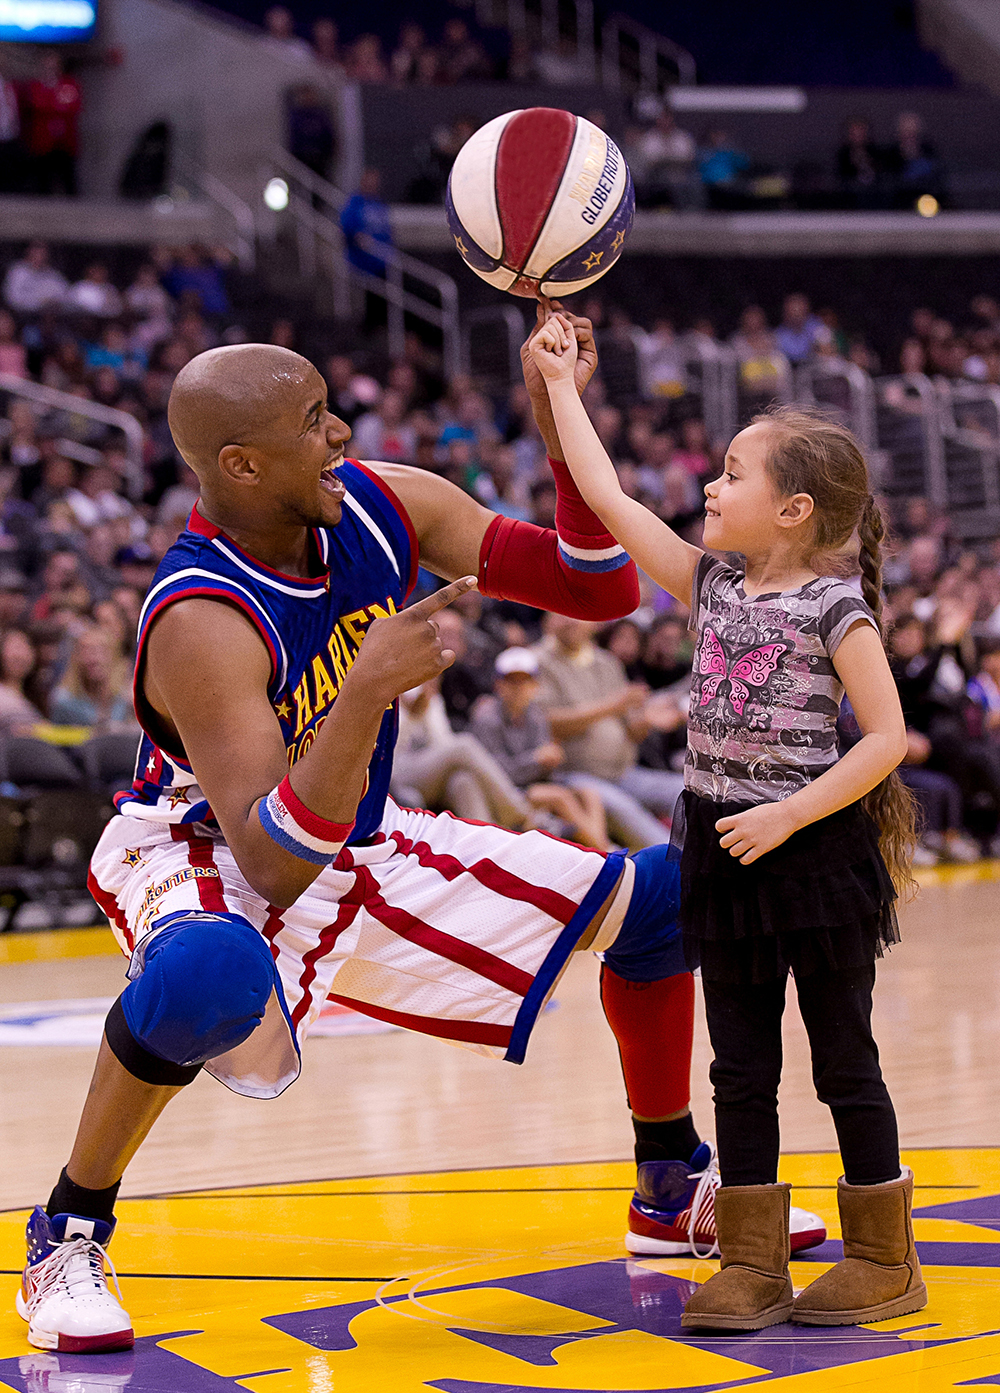 Shane “Scooter” Christensen helps a young fan spin a basketball on her finger at the Staples Center in Los Angeles. (Photo by Harlem Globetrotters International, Inc.)